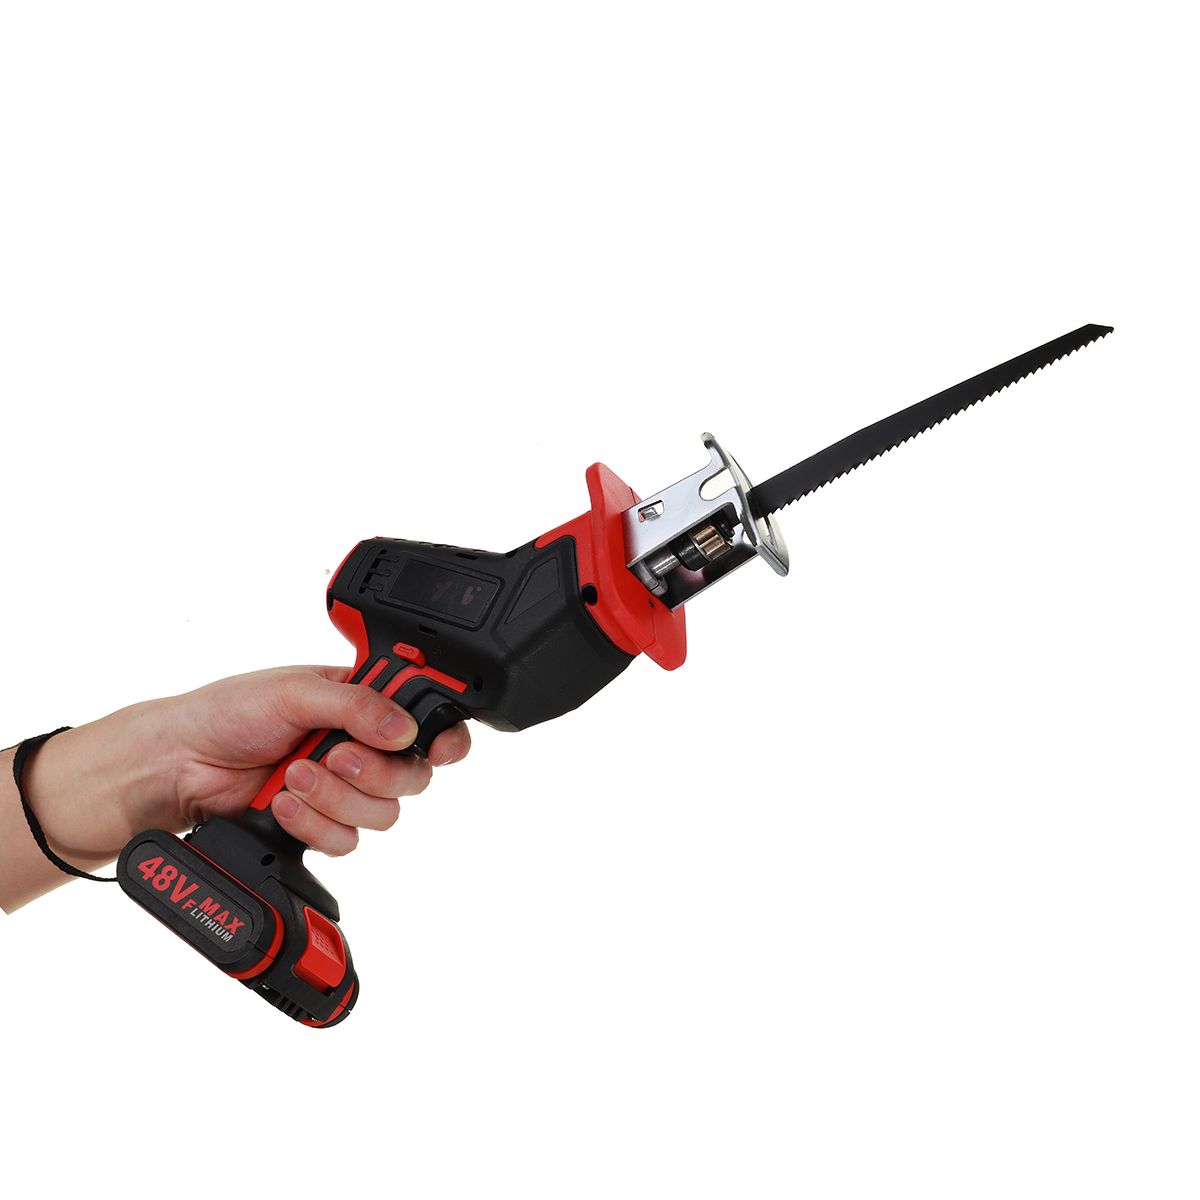 110-240V-Lithium-Ion-Cordless-Reciprocating-Saw-Rechargeable-w4-Blades-12-Battery-1669890